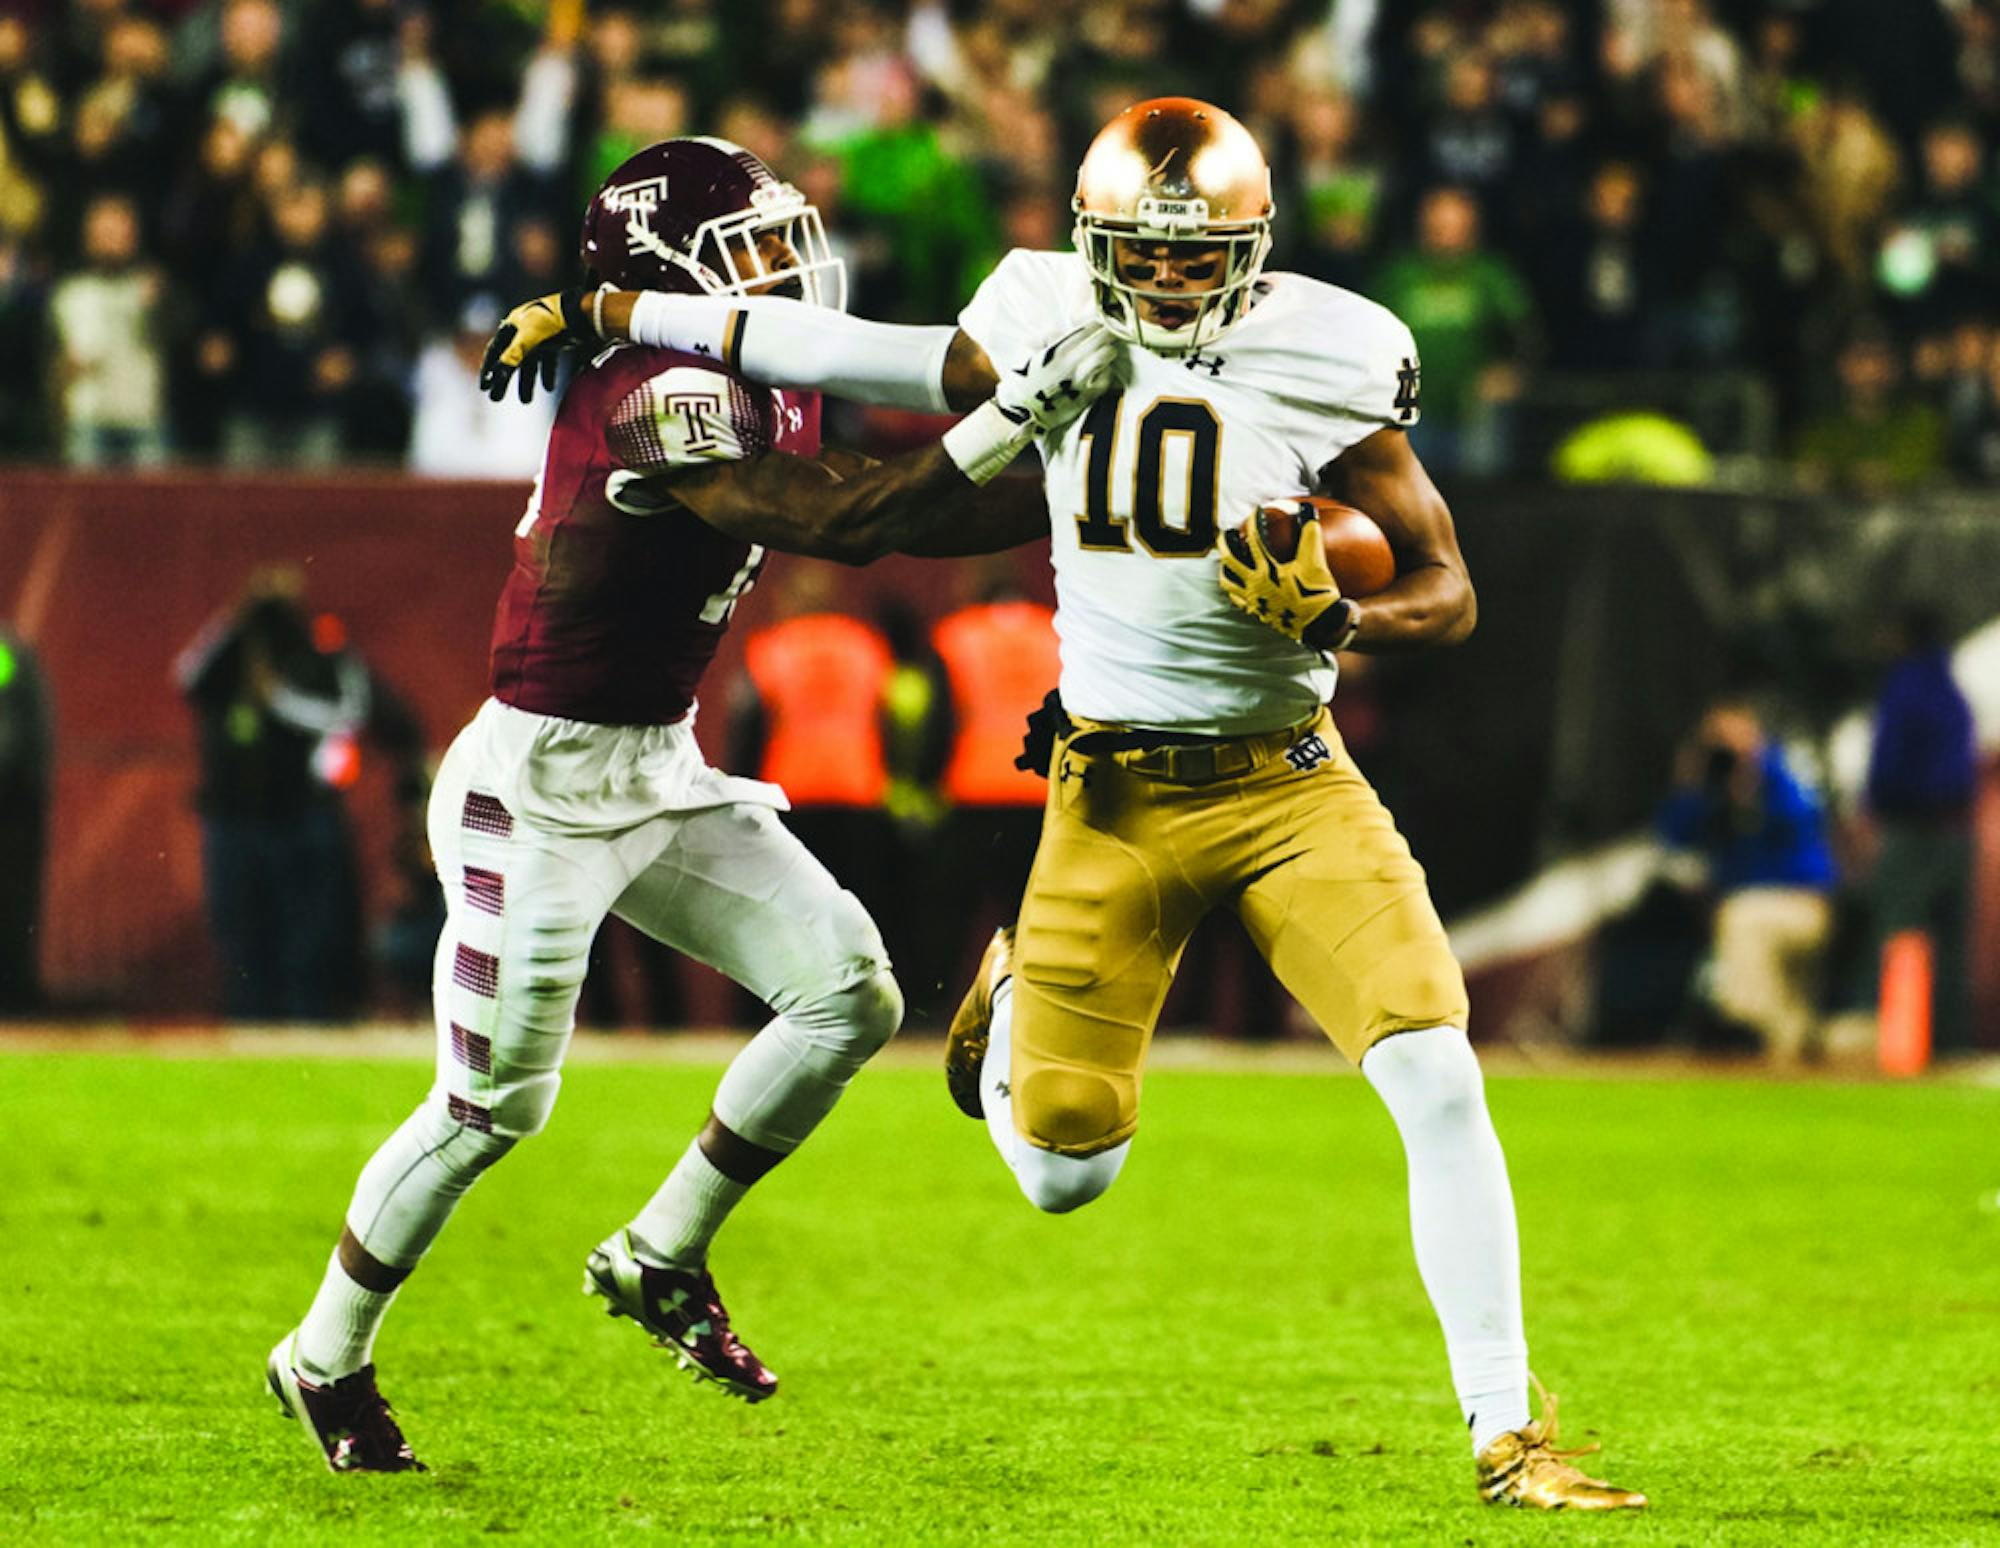 Irish freshman tight end Alizé Jones tries to push off a Temple defender on a 45-yard reception in Notre Dame’s 24-20 victory over the Owls last Saturday at Lincoln Financial Field in Philadelphia.